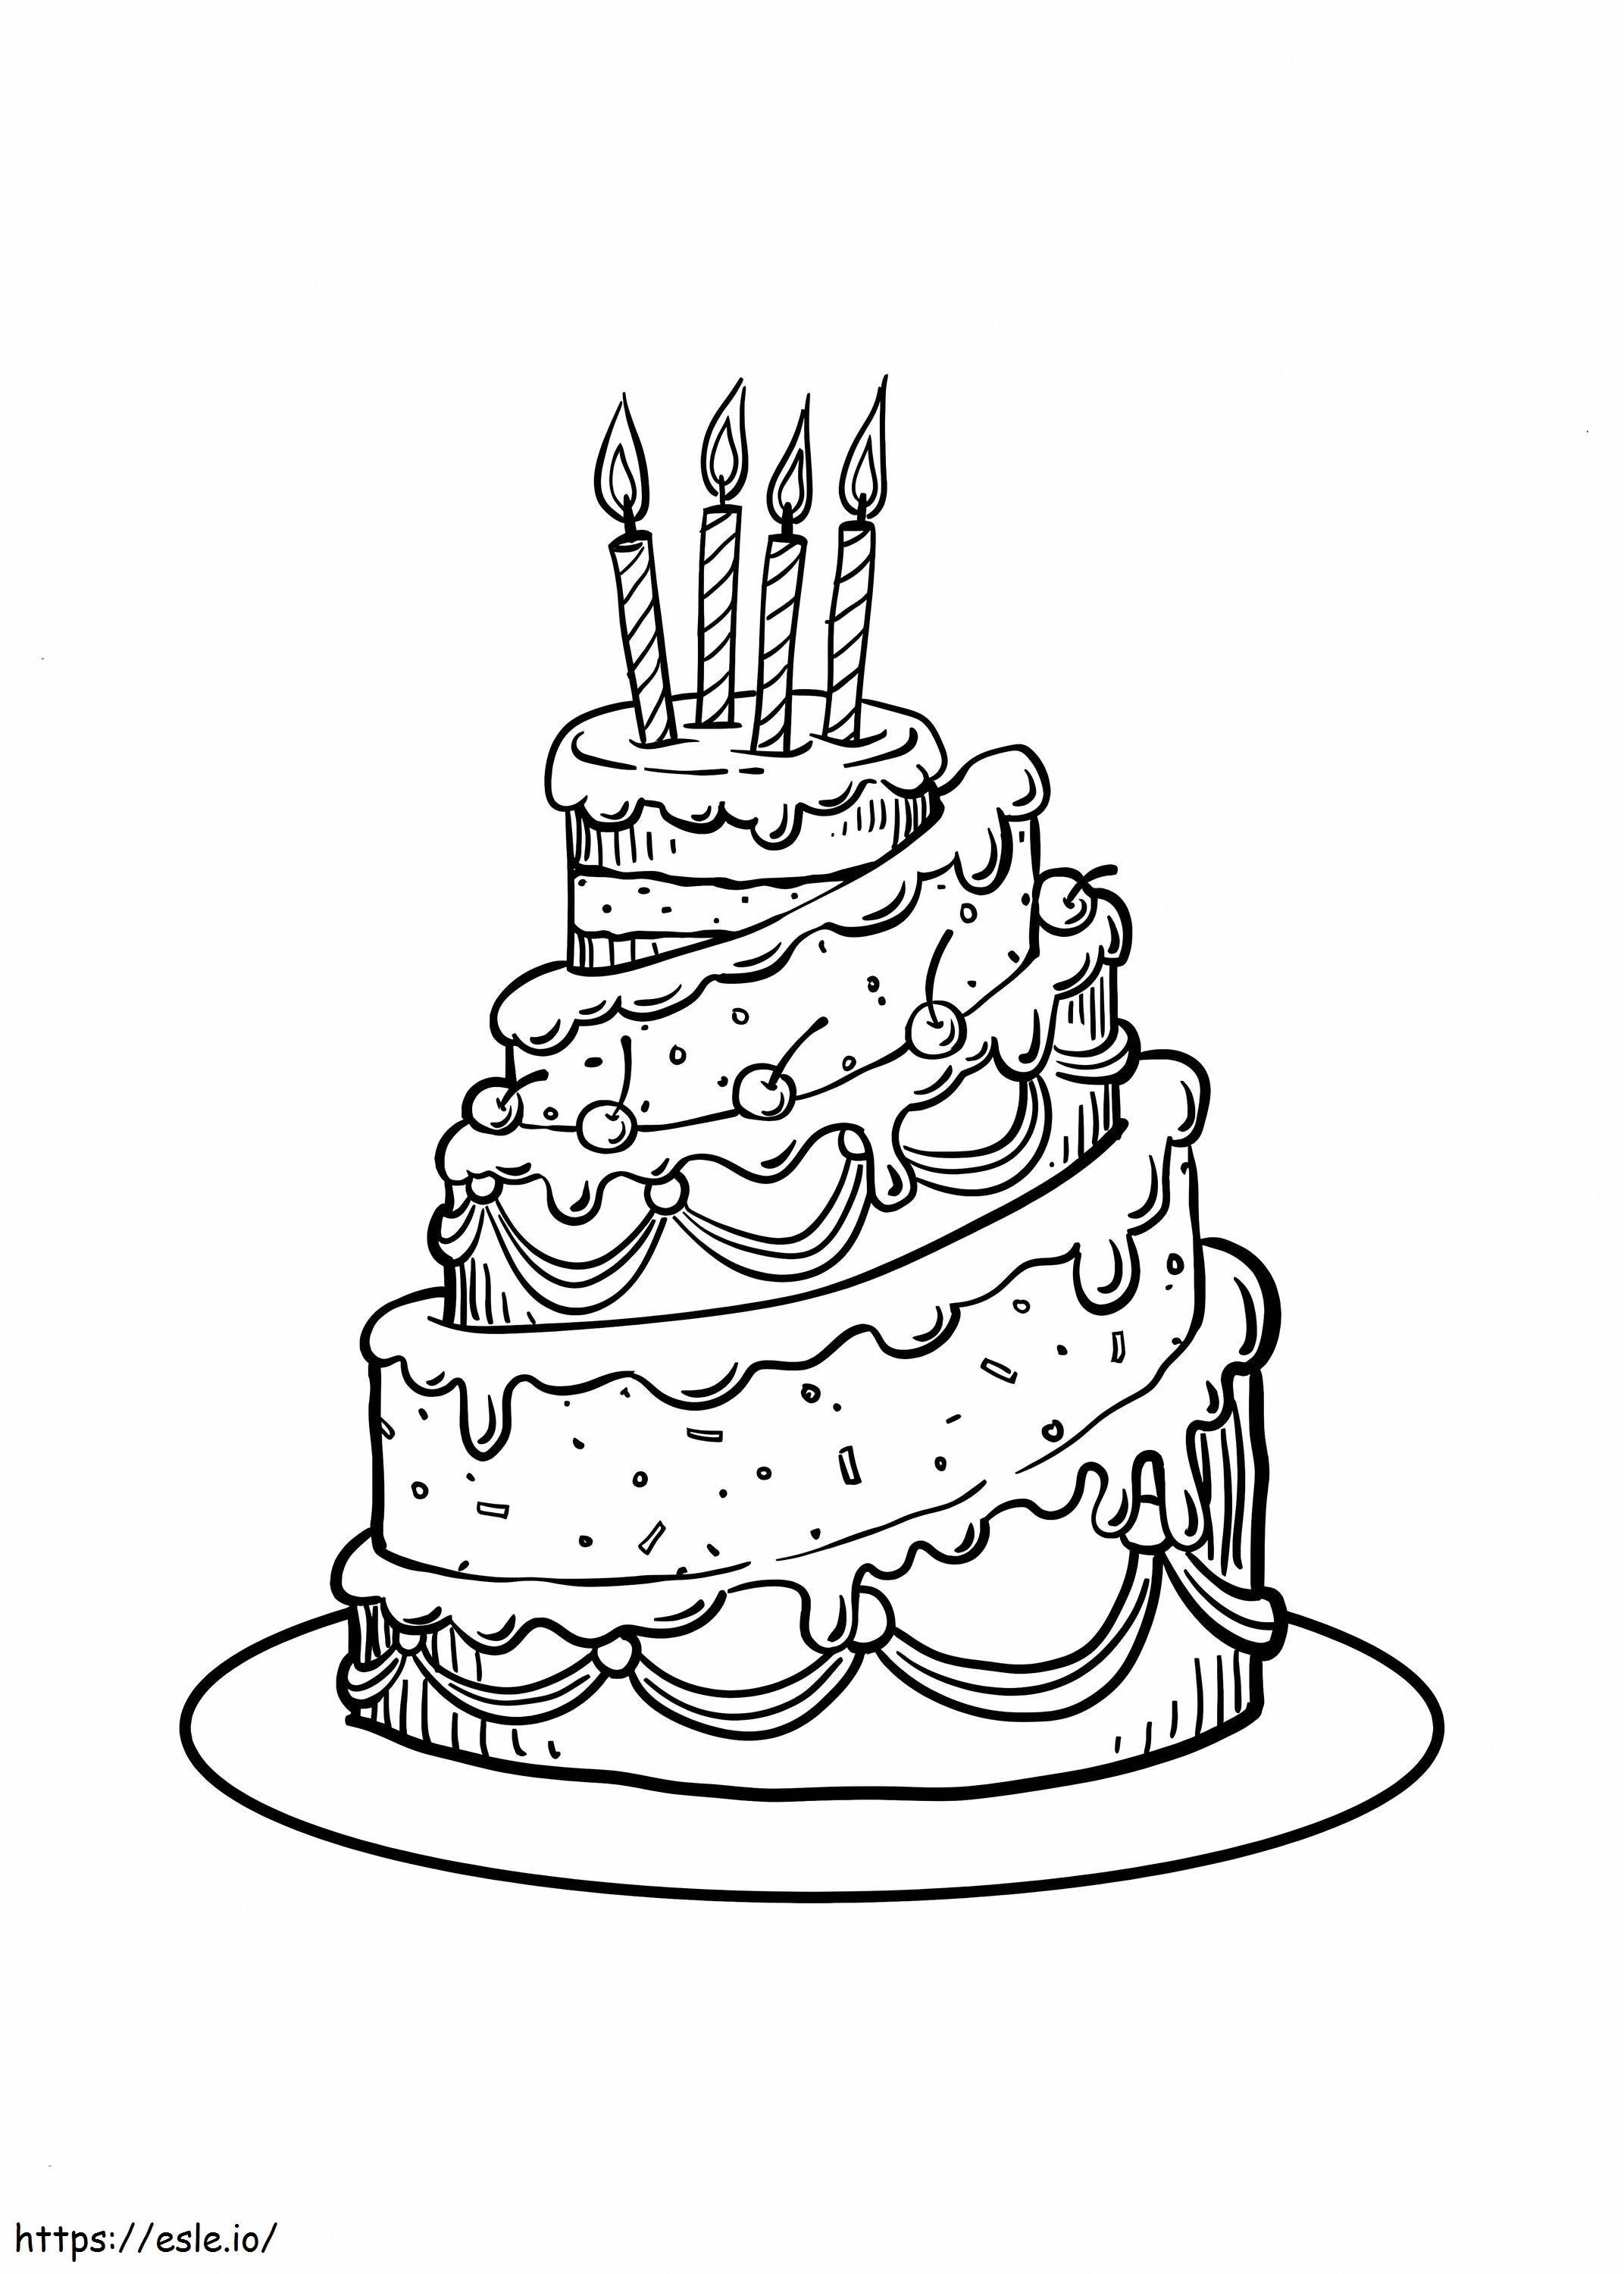 Awesome Birthday Cake coloring page